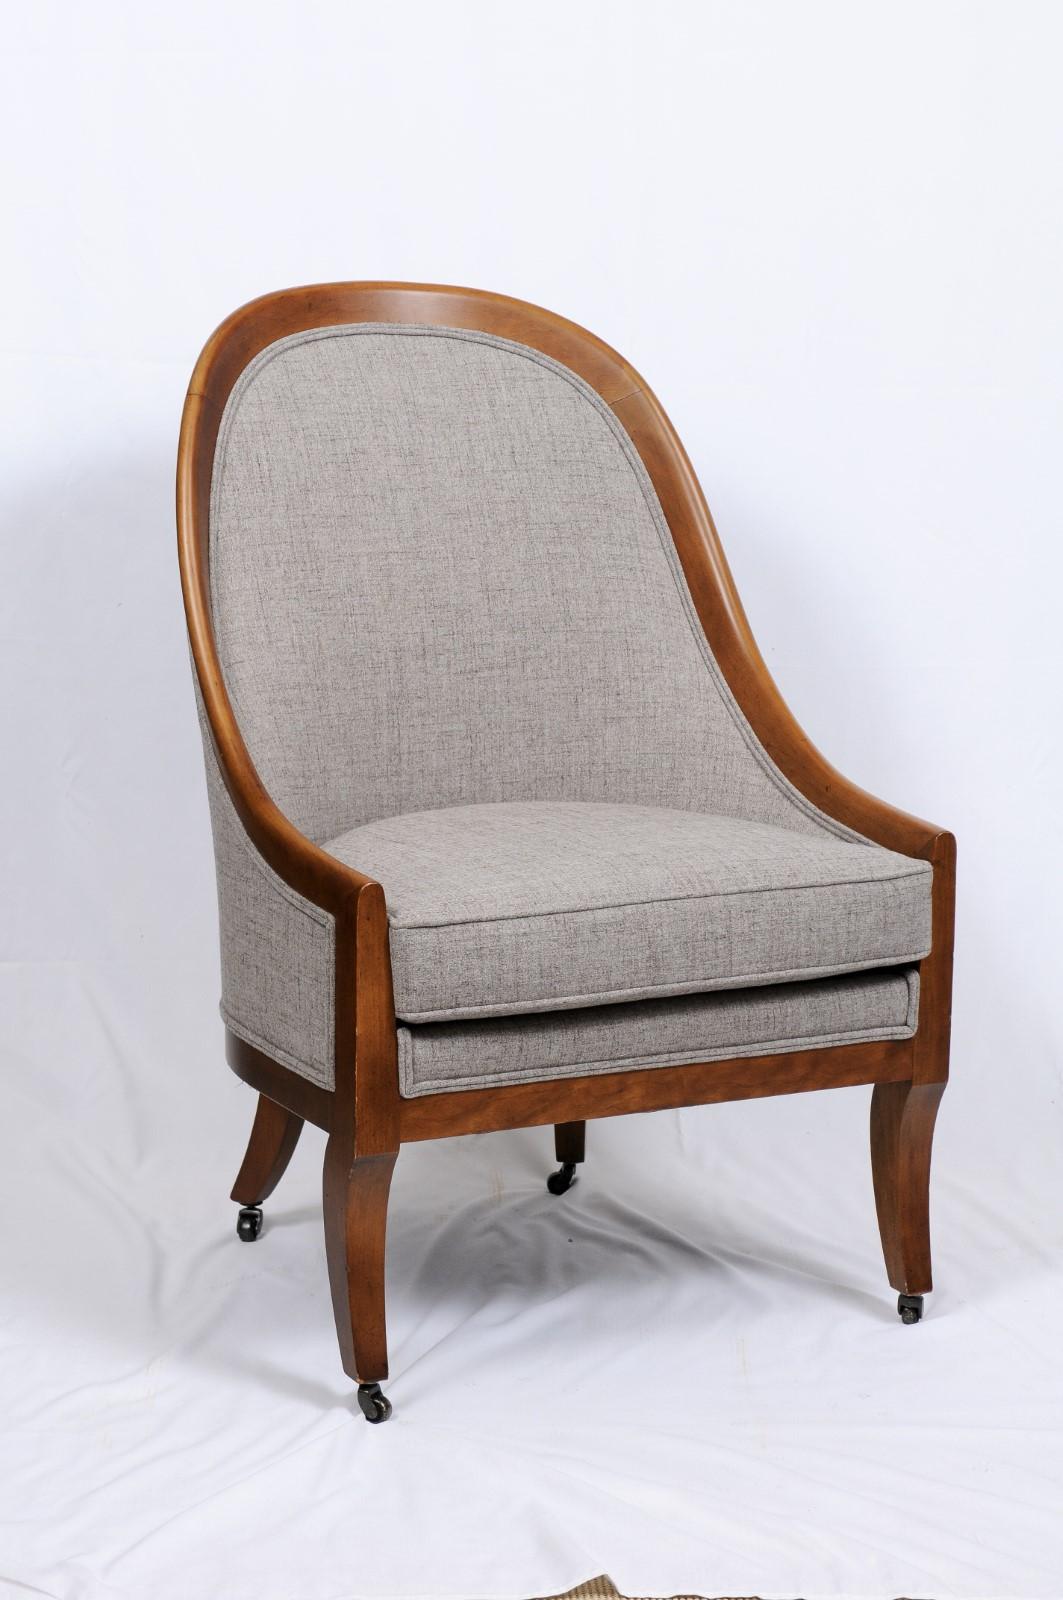 Baker Furniture Co. pair of chairs, walnut frames: Curved form back and arms with cabriole legs tapering to caster feet. Loose seat cushions. They measure H. 40